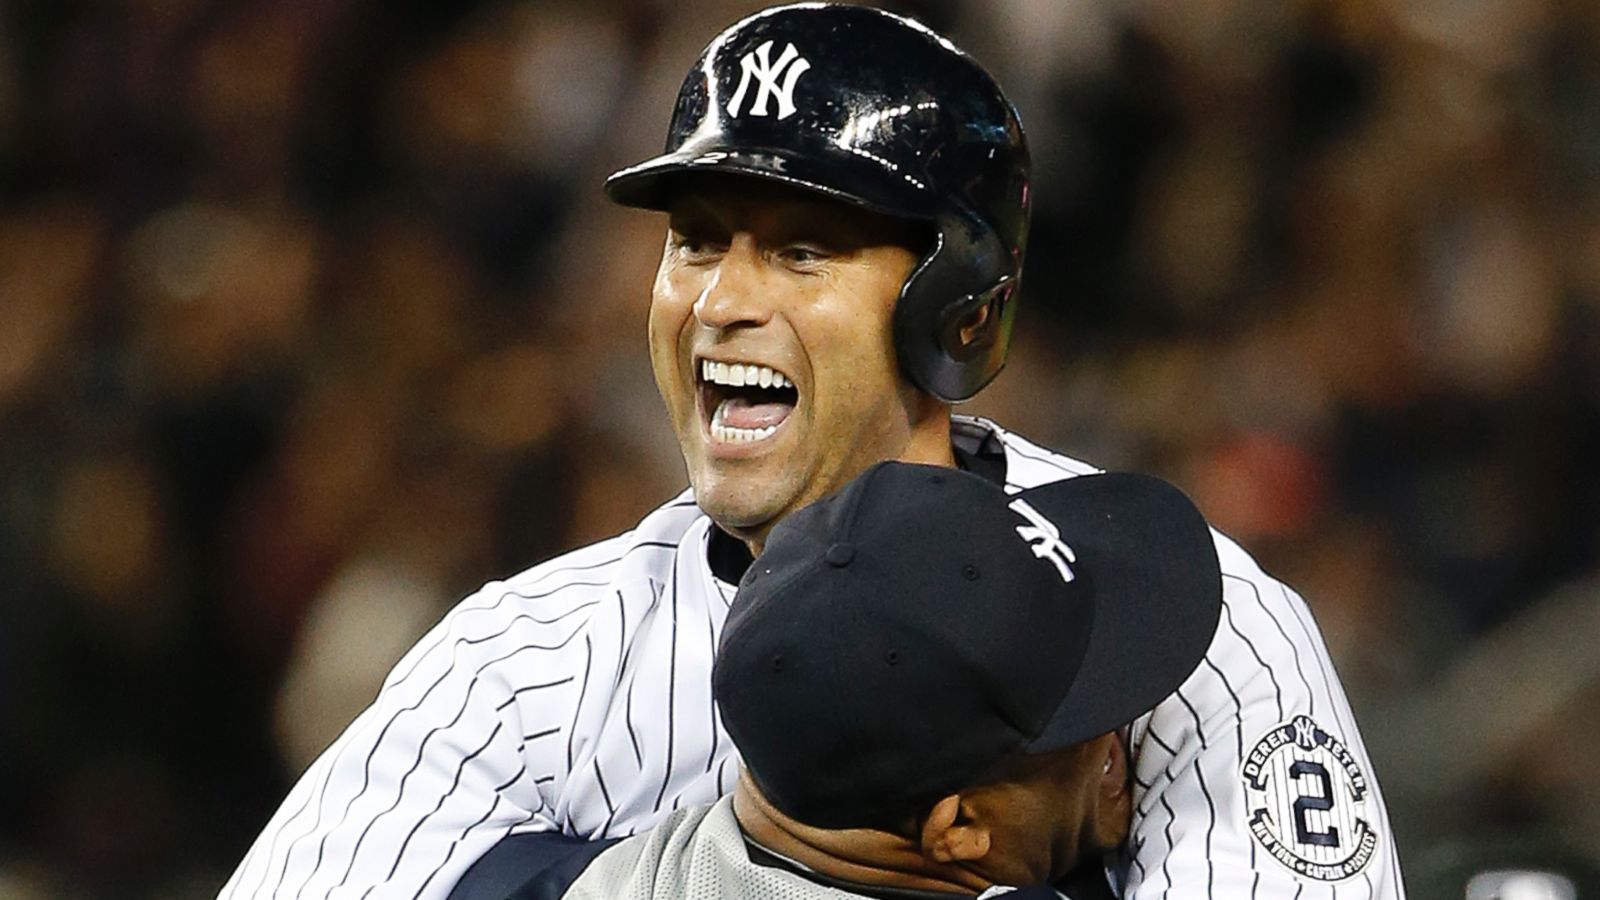 Derek Jeter's Last Home Game Shows Why He's 'Captain Clutch' - ABC